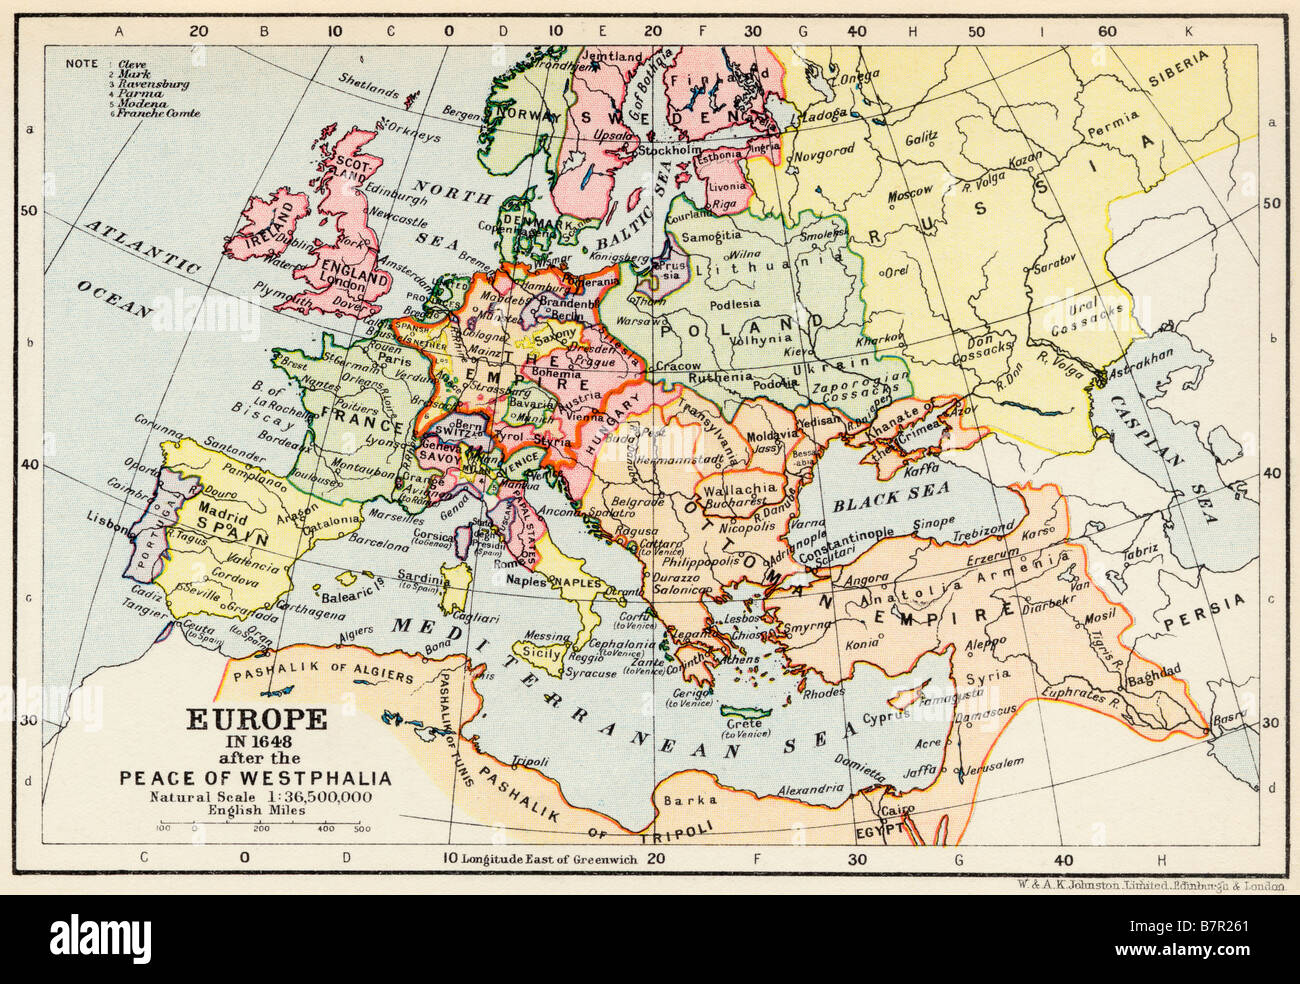 Map of Europe in 1648 after the Peace of Westphalia Stock Photo